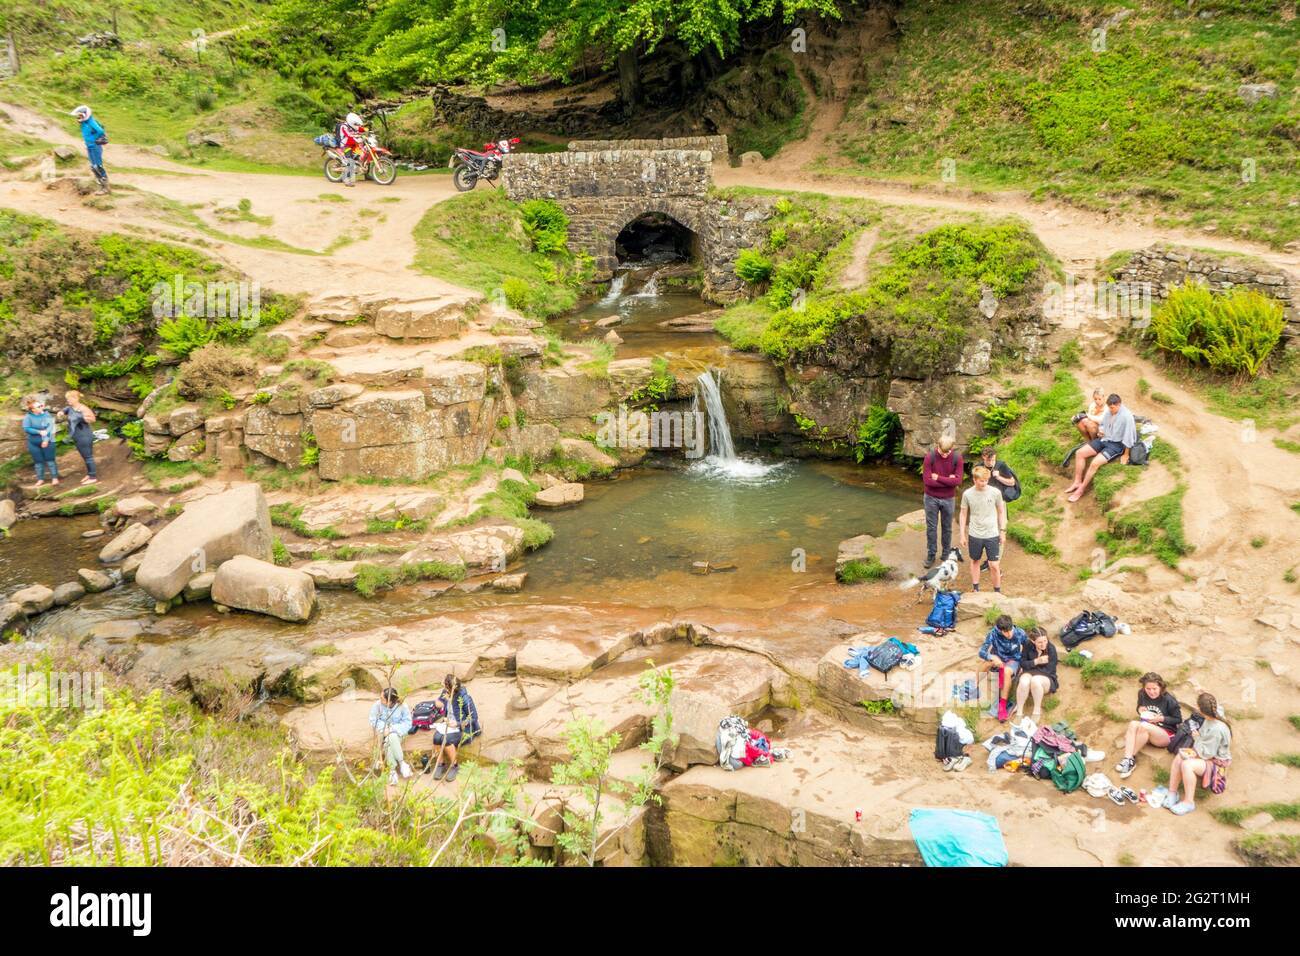 People picnicking and swimming in  the river Dane at the Three Shire Heads  where Cheshire, Derbyshire and Staffordshire meet in the Peak District Stock Photo